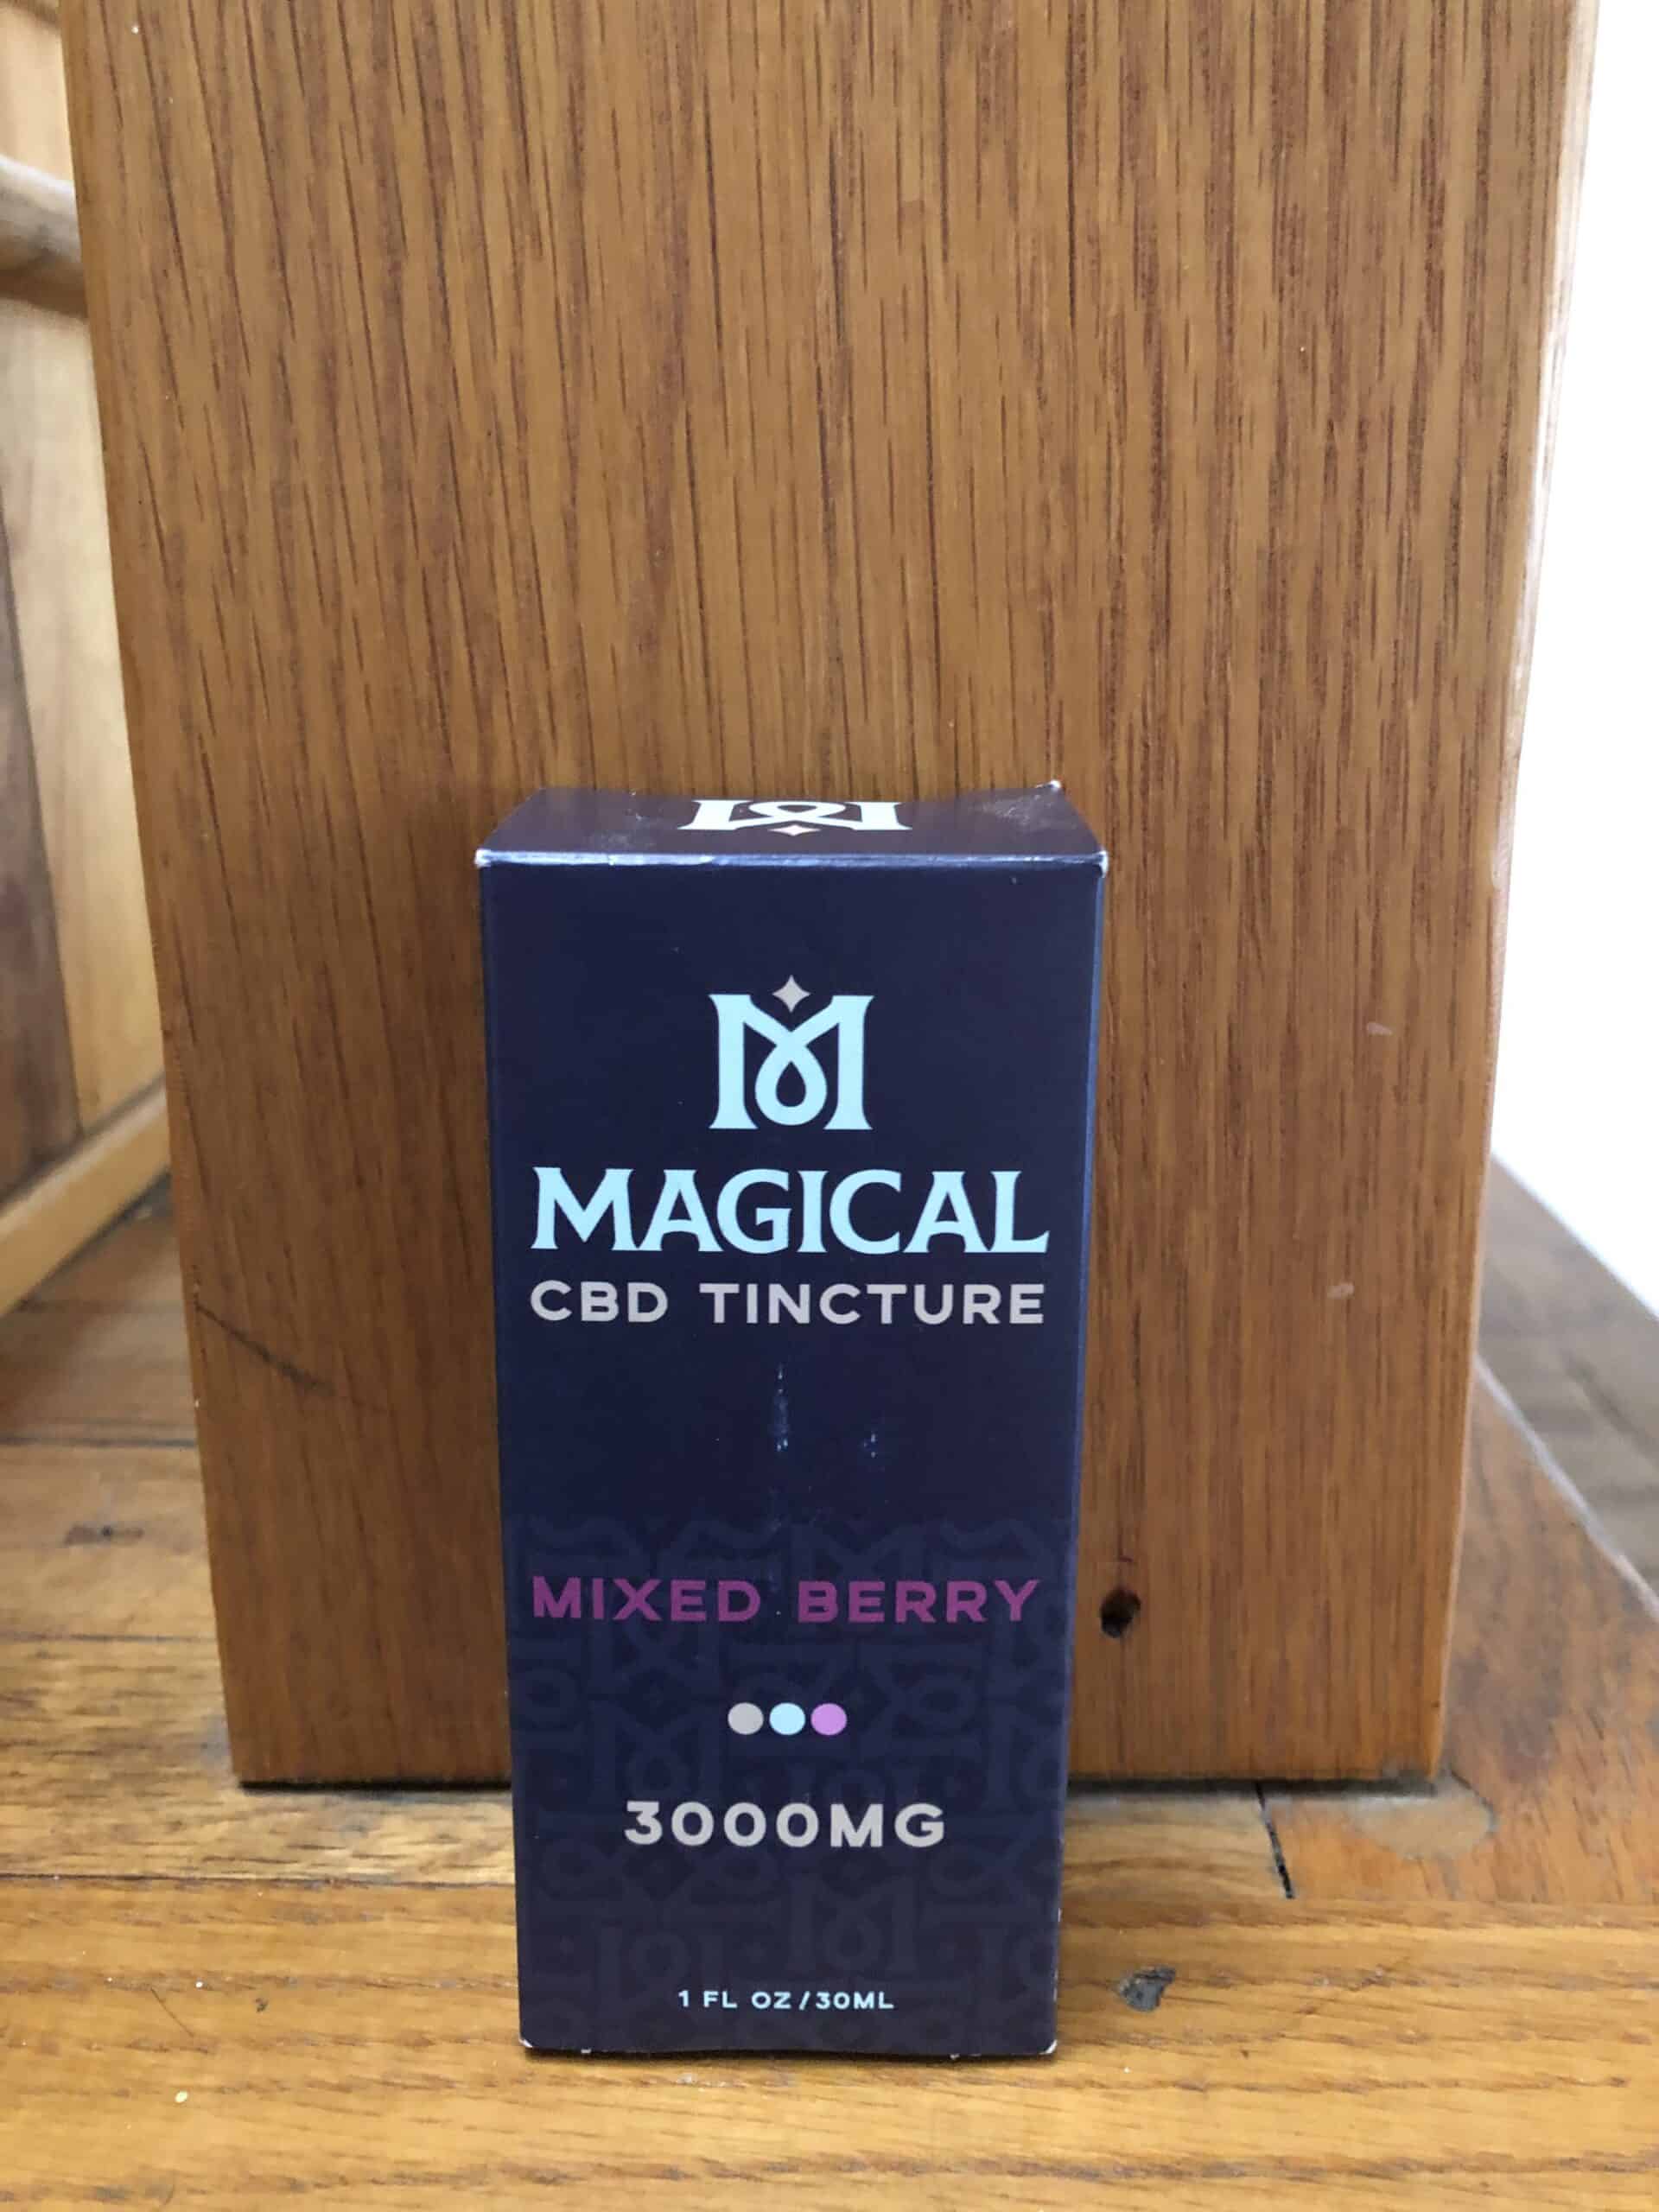 Magical CBD Mixed Berry 3000mg Tincture Review